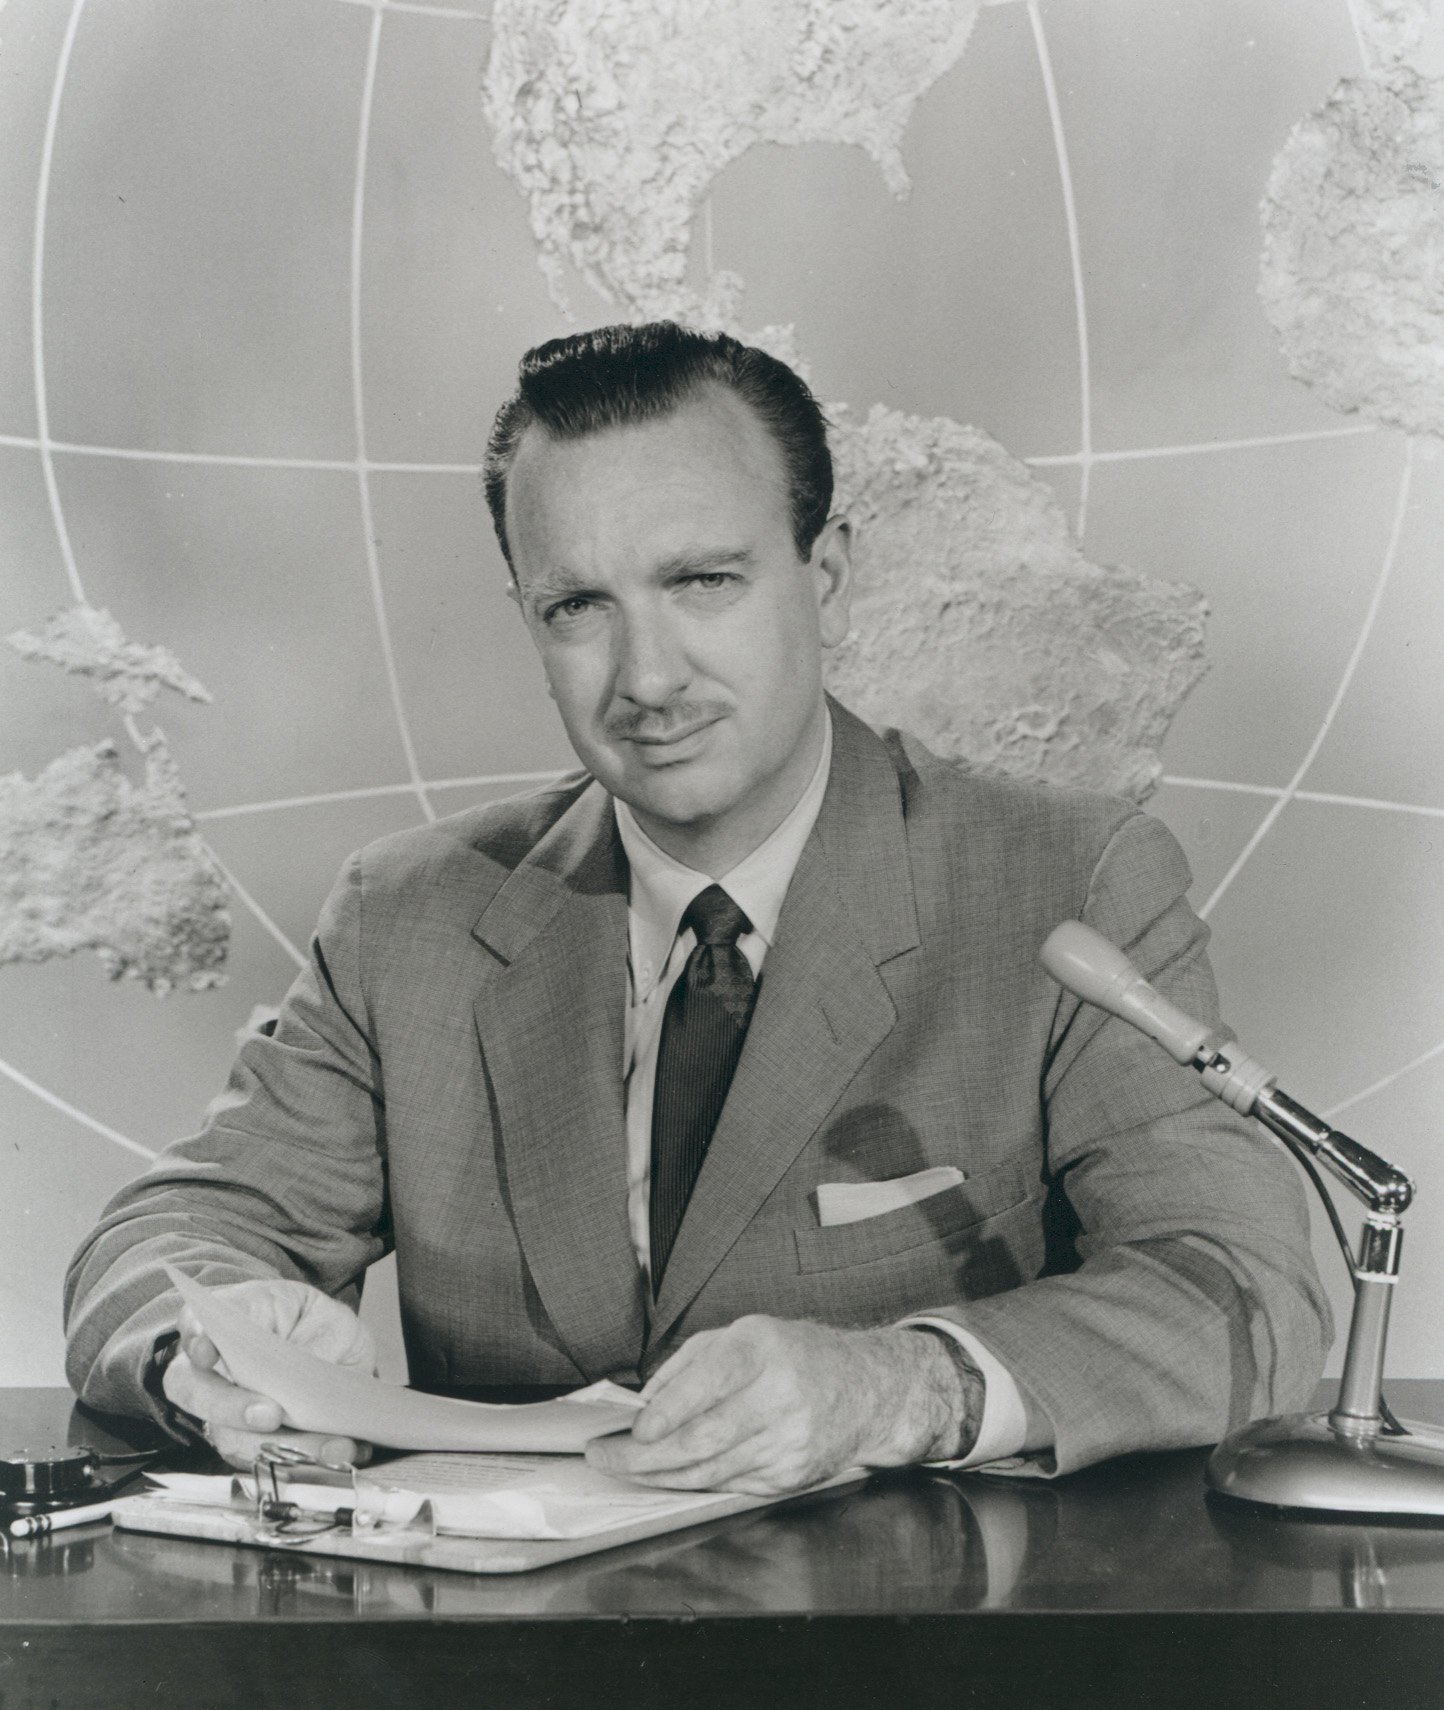 Promotional portrait of CBS "Evening News" anchorman, Walter Cronkite sitting behind a desk during mid the 1950s | Photo: Getty Images